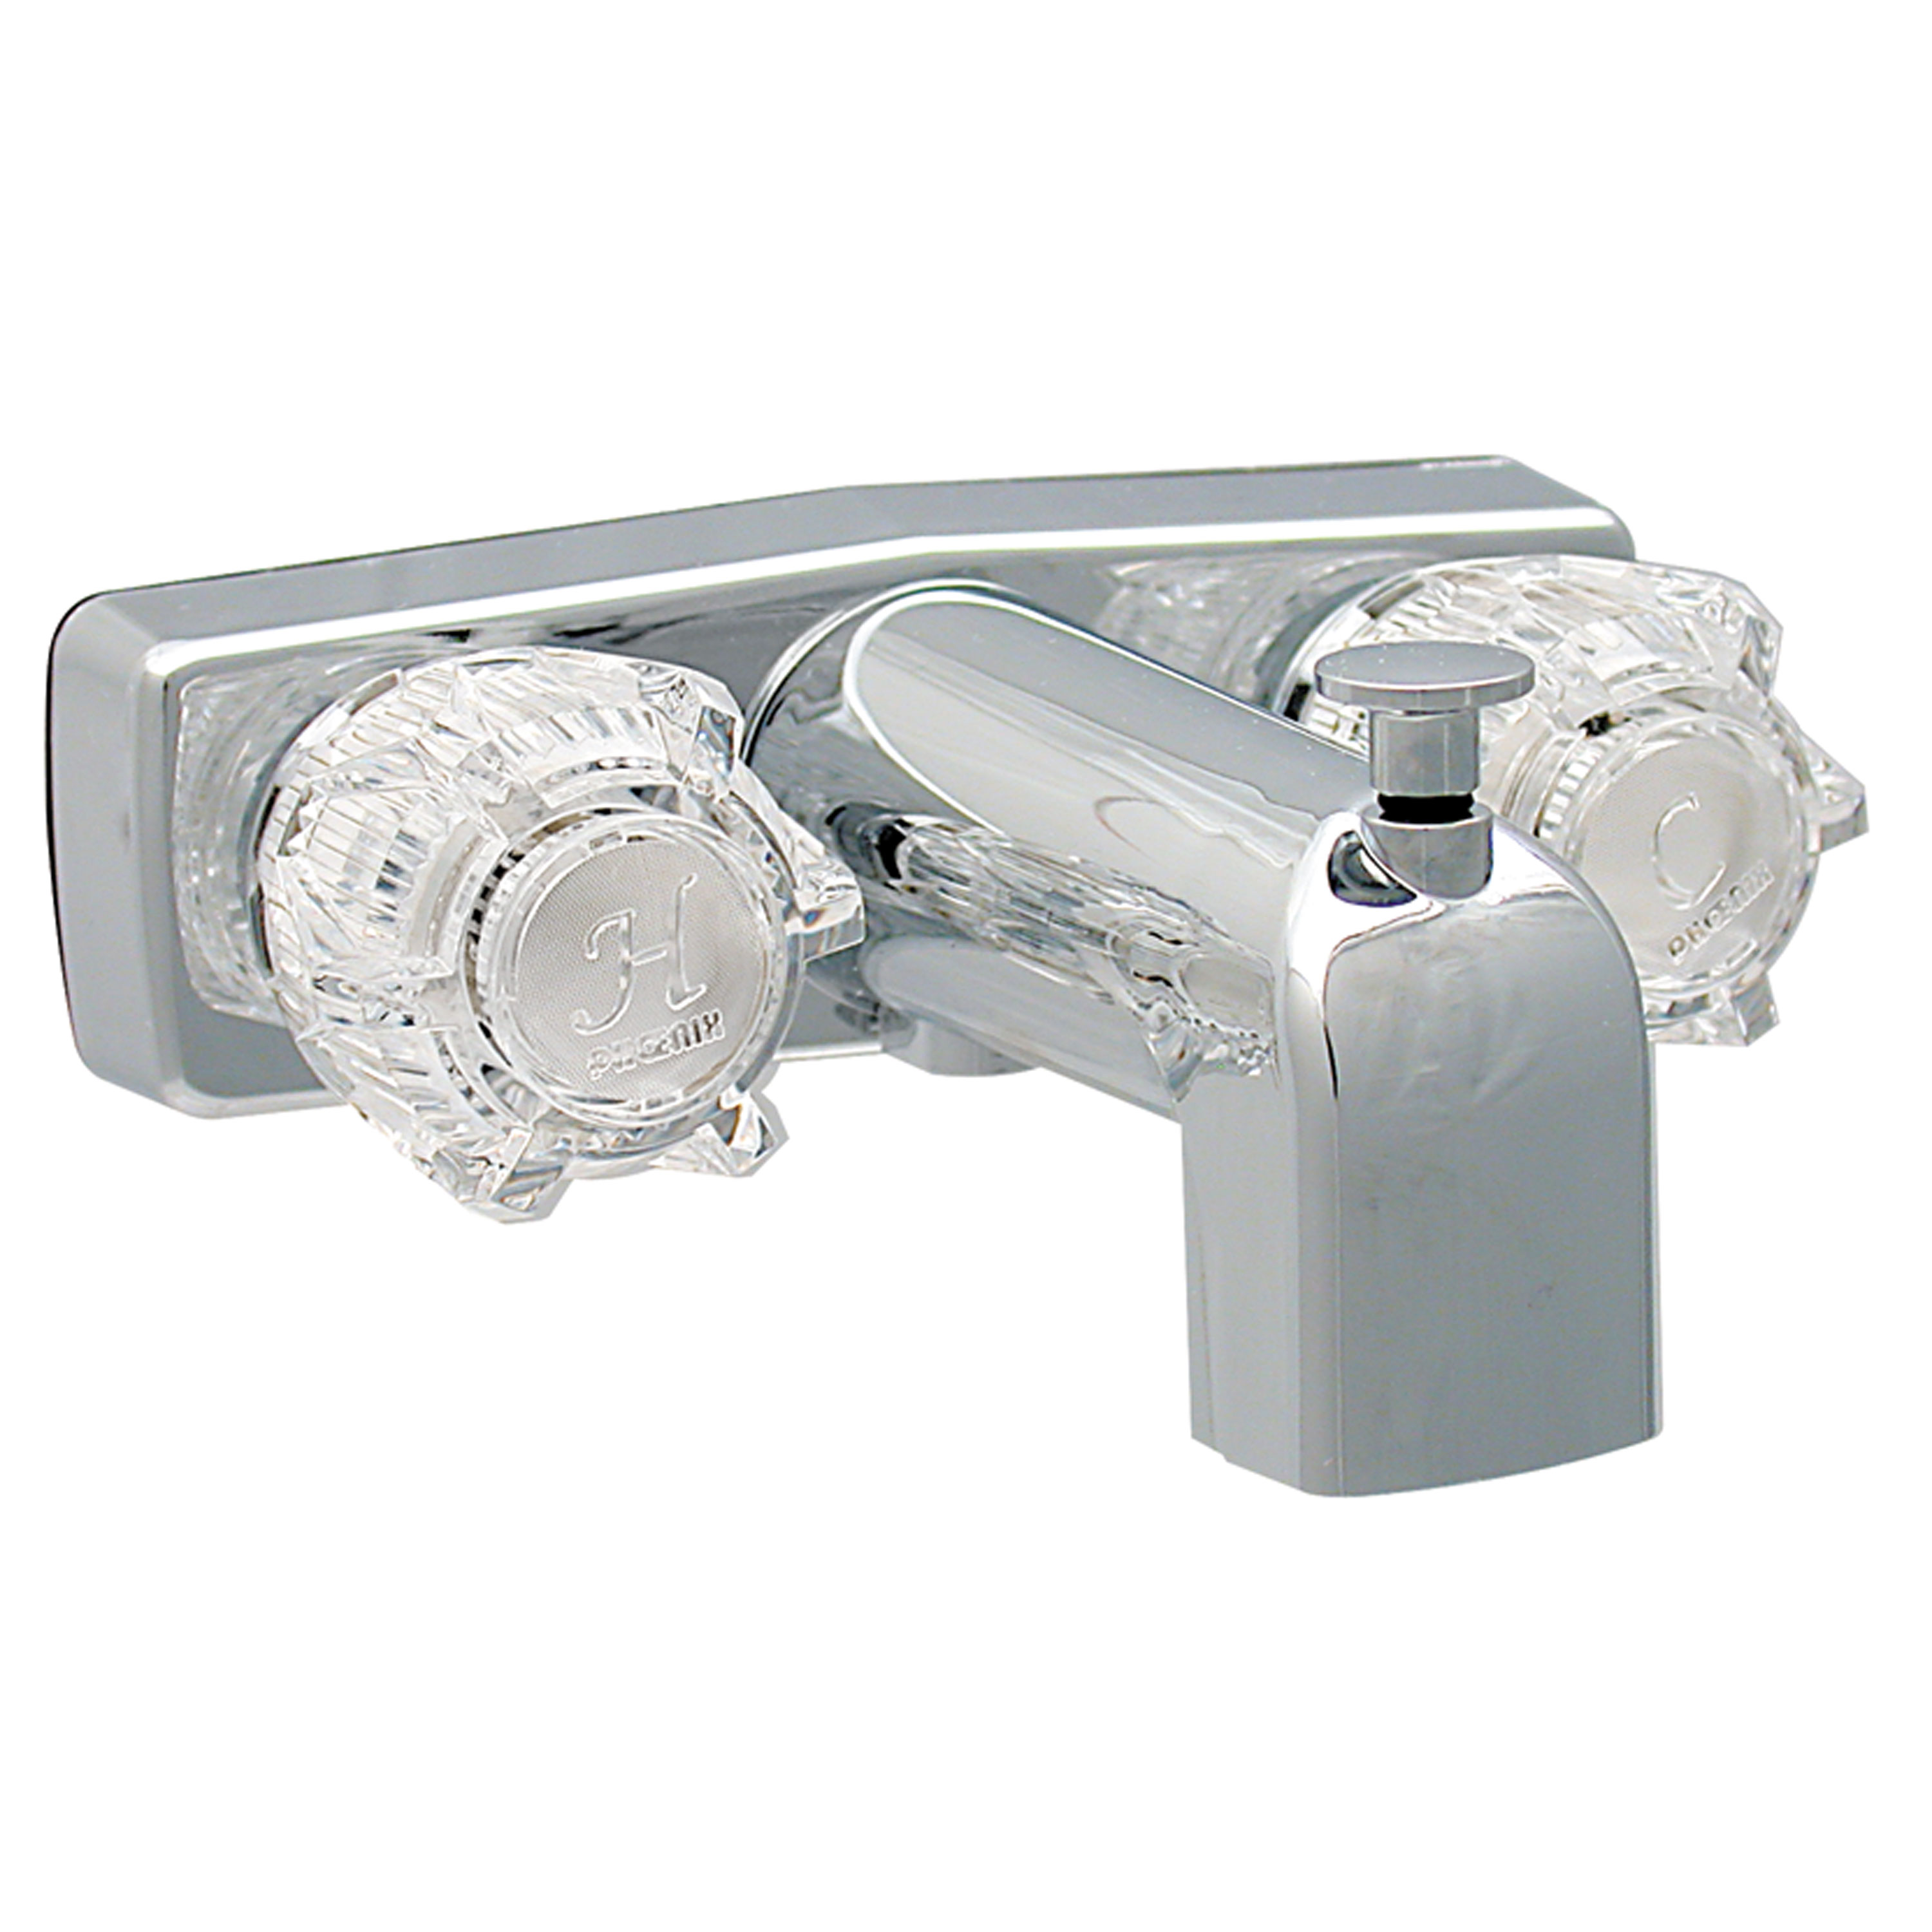 Clawfoot Tub Faucet With Shower Diverter - www.inf-inet.com